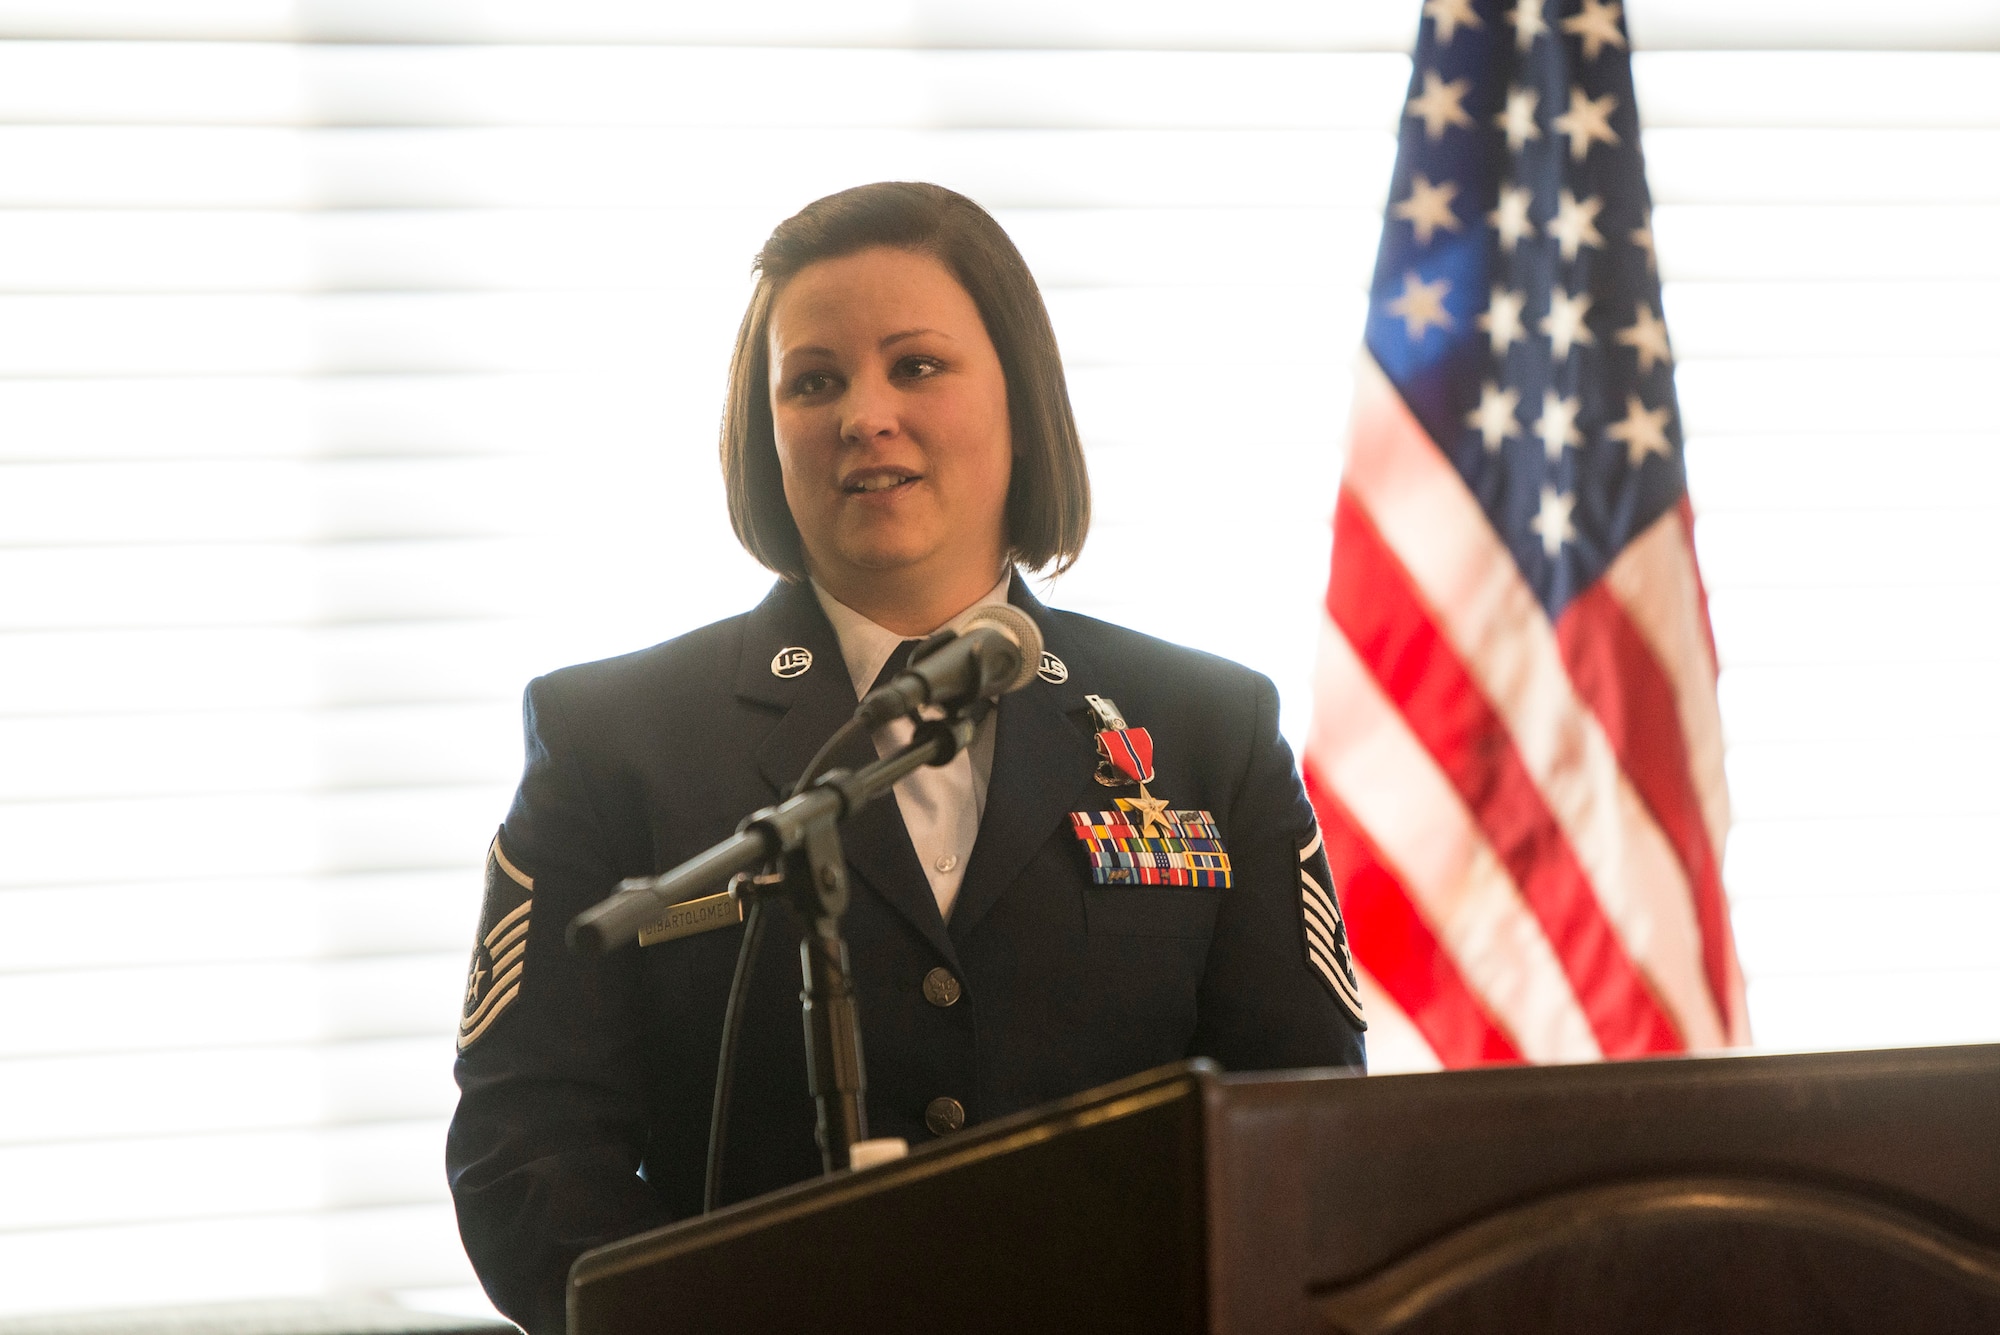 U.S. Air Force Master Sgt. Wendi DiBartolomeo speaks during a ceremony after being awarded the Bronze Star Medal, April 15, 2022 at Wright-Patterson Air Force Base, Ohio. DiBartolomeo was awarded the Bronze Star for her actions during Operation Allies Refuge in Kabul, Afghanistan.